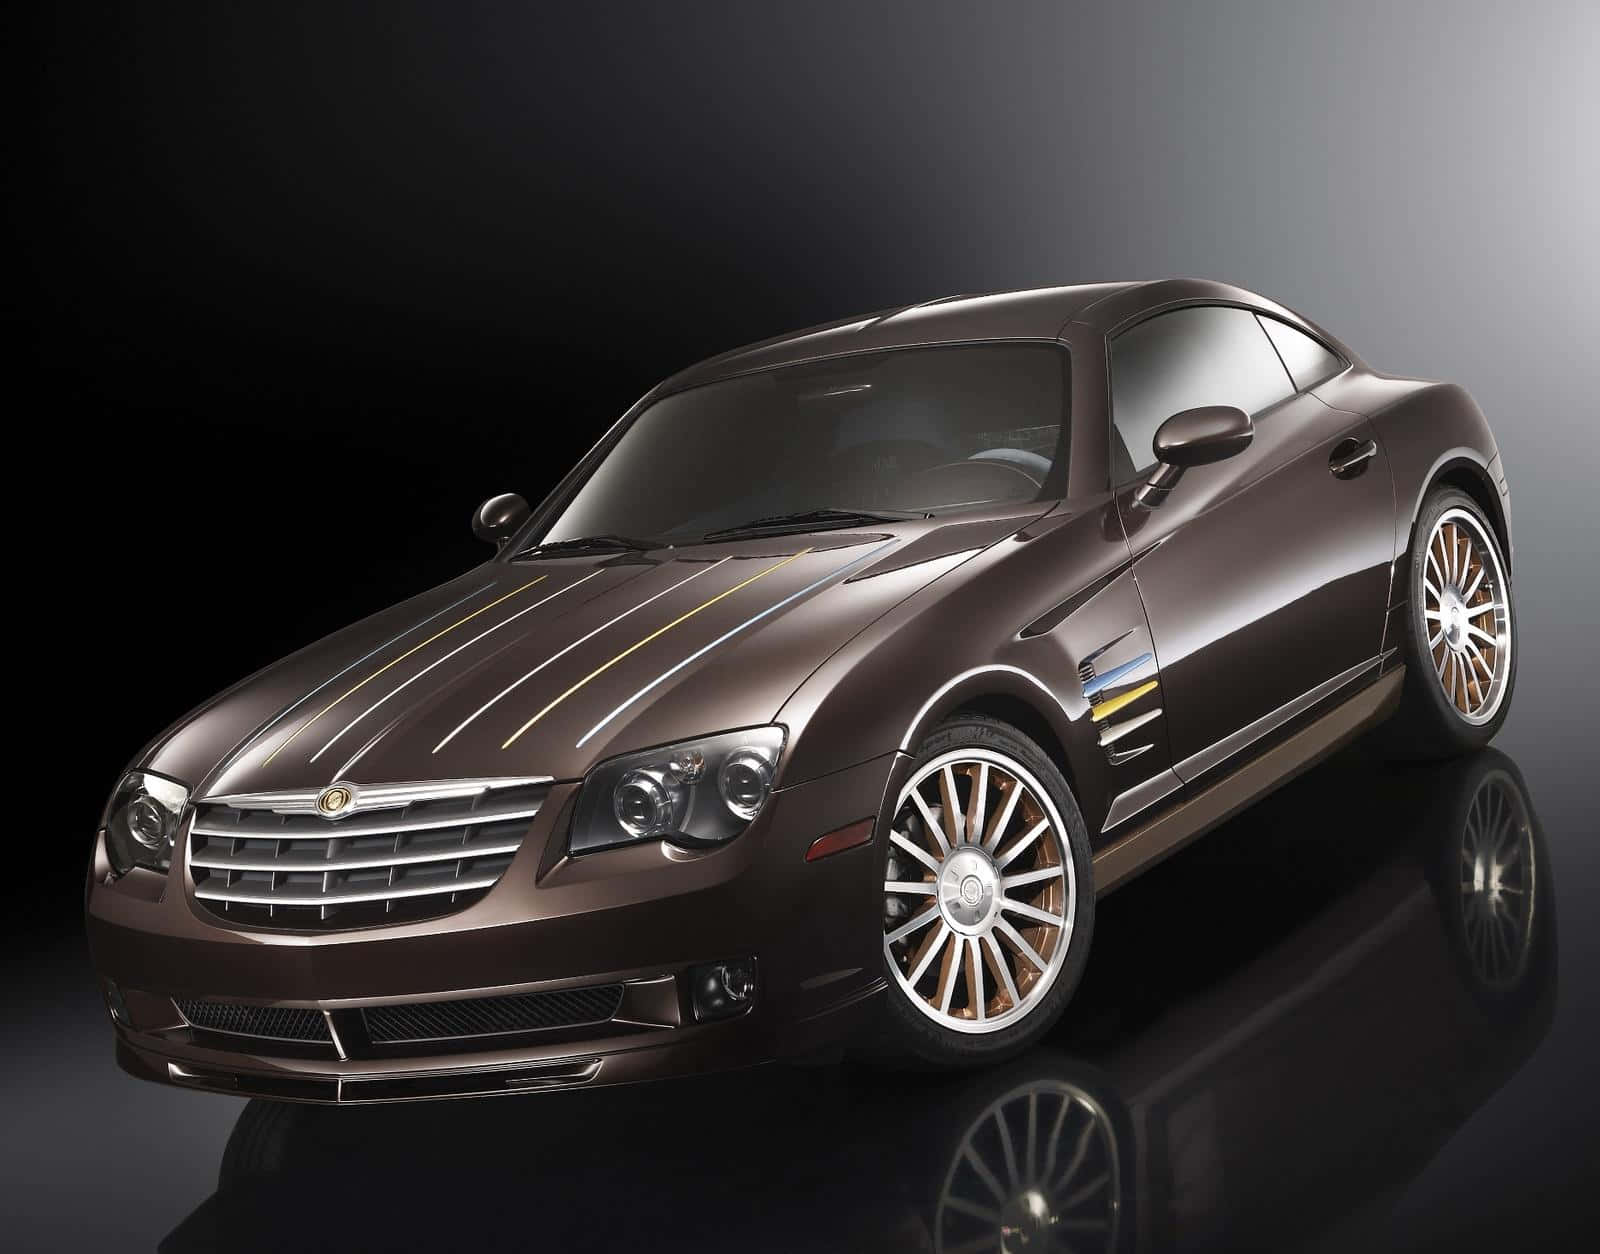 Sleek and Stylish Chrysler Crossfire on the Open Road Wallpaper